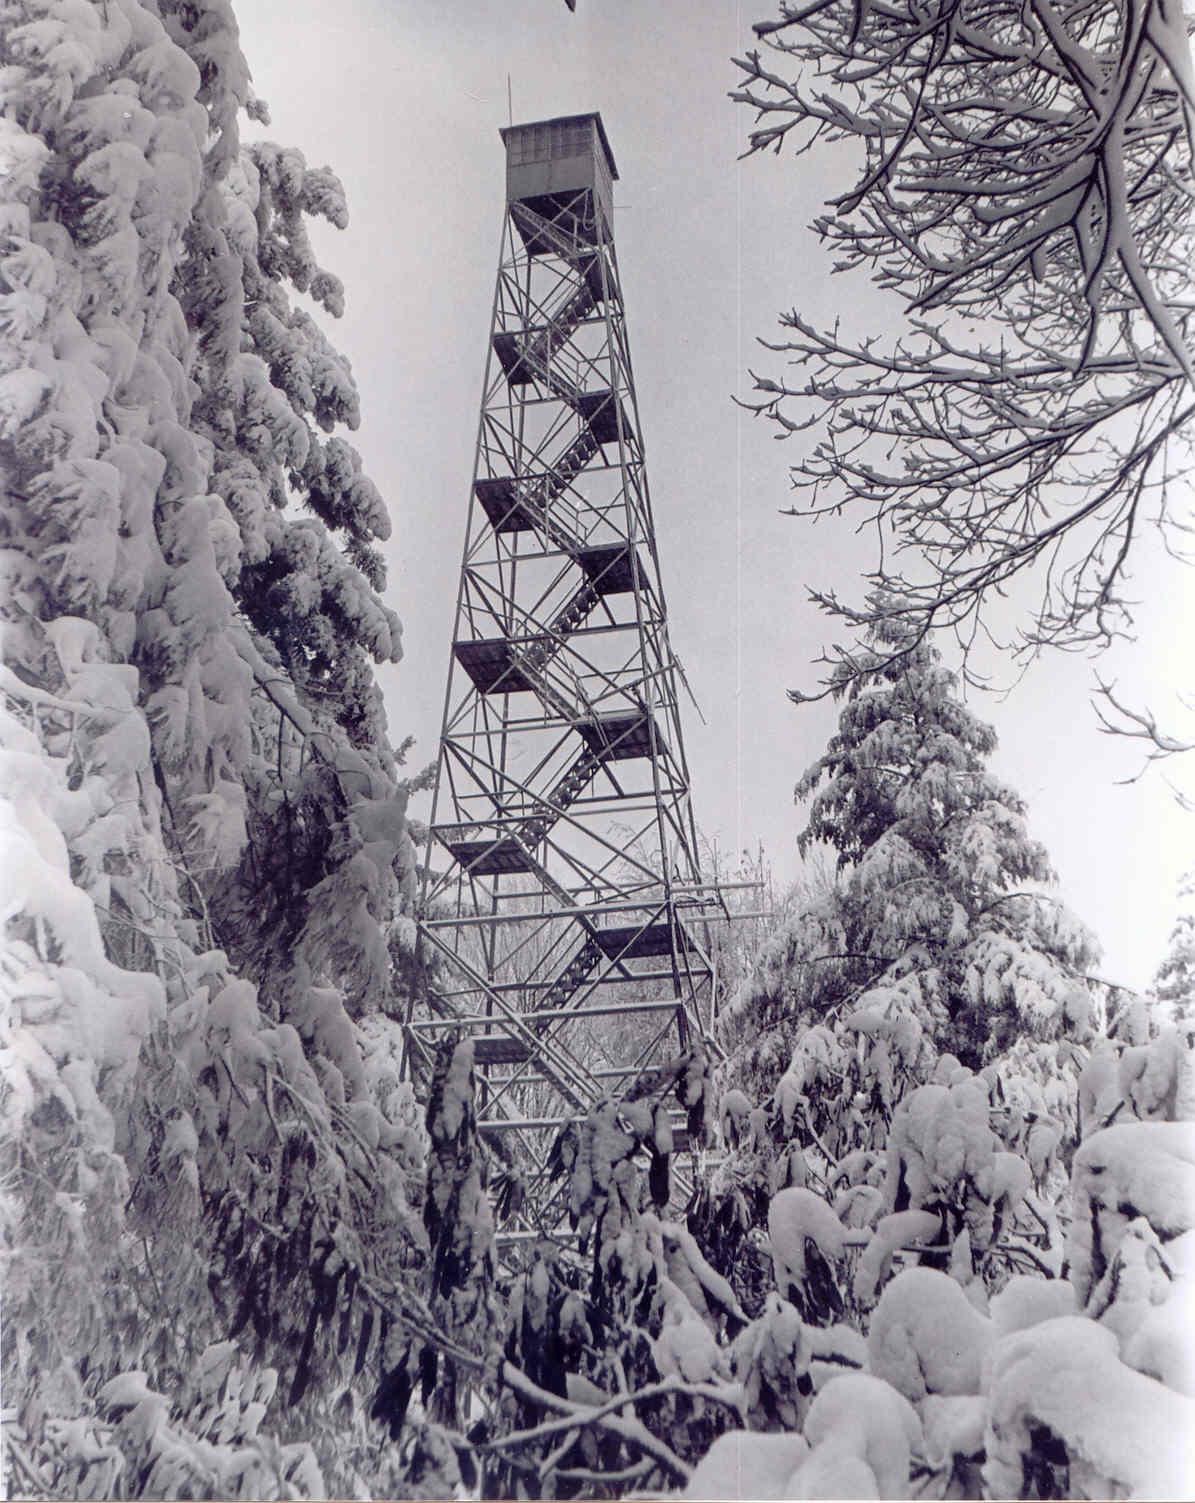 Lookout legacy: Fire towers stand as lofty reminders of West Virginiaâ€™s firefighting history